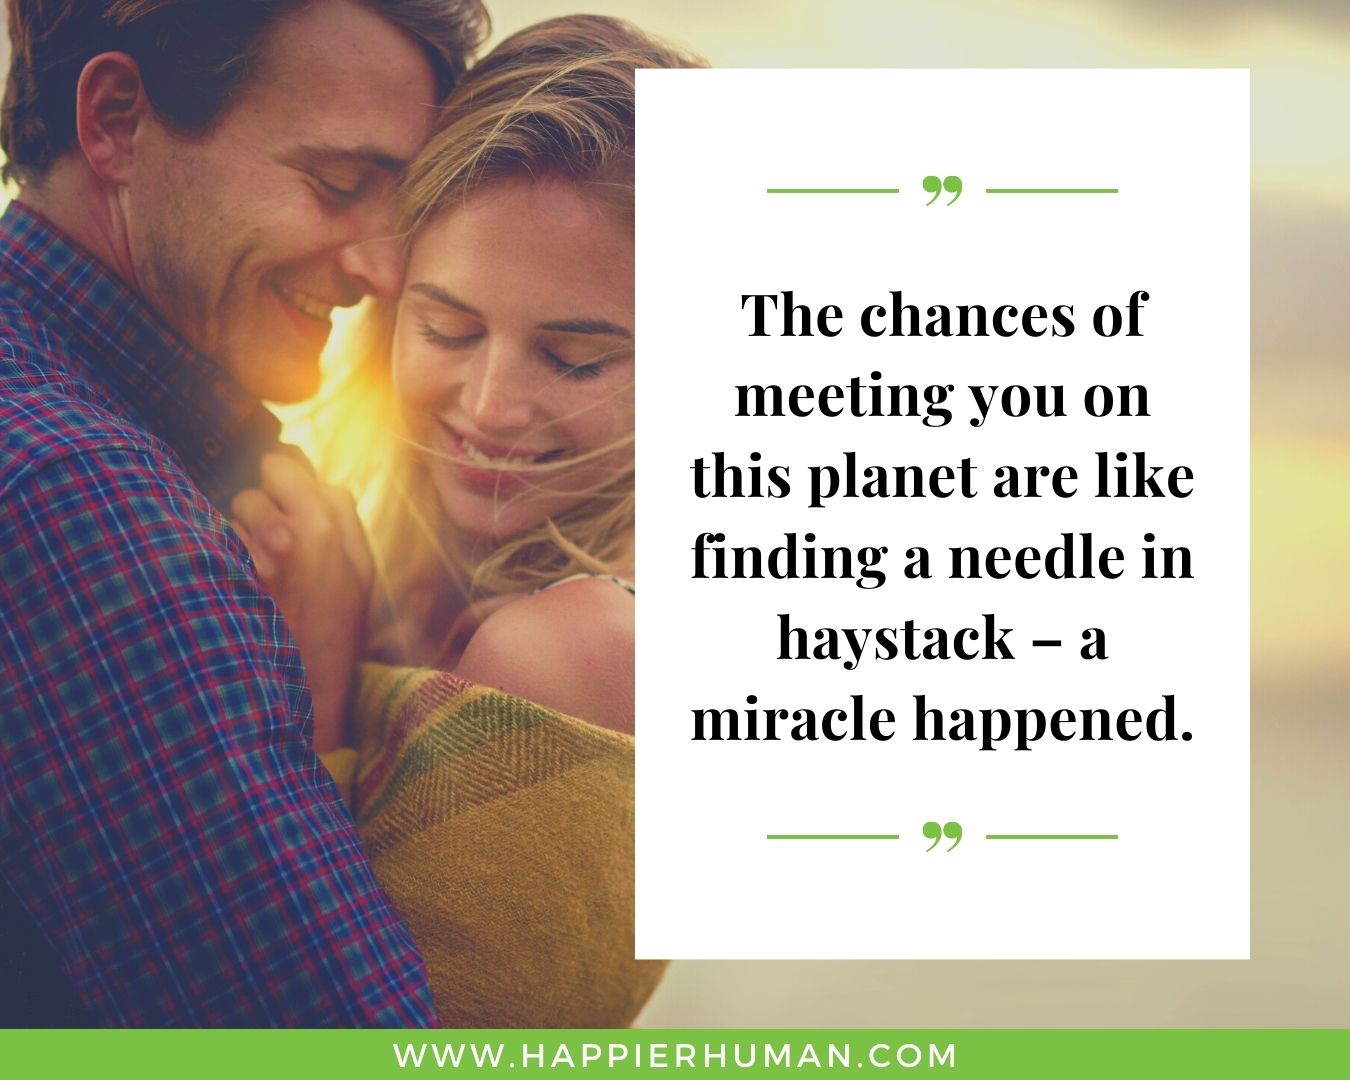 Sweet and Romantic Love Quotes for Her - “The chances of meeting you on this planet are like finding a needle in haystack – a miracle happened.”